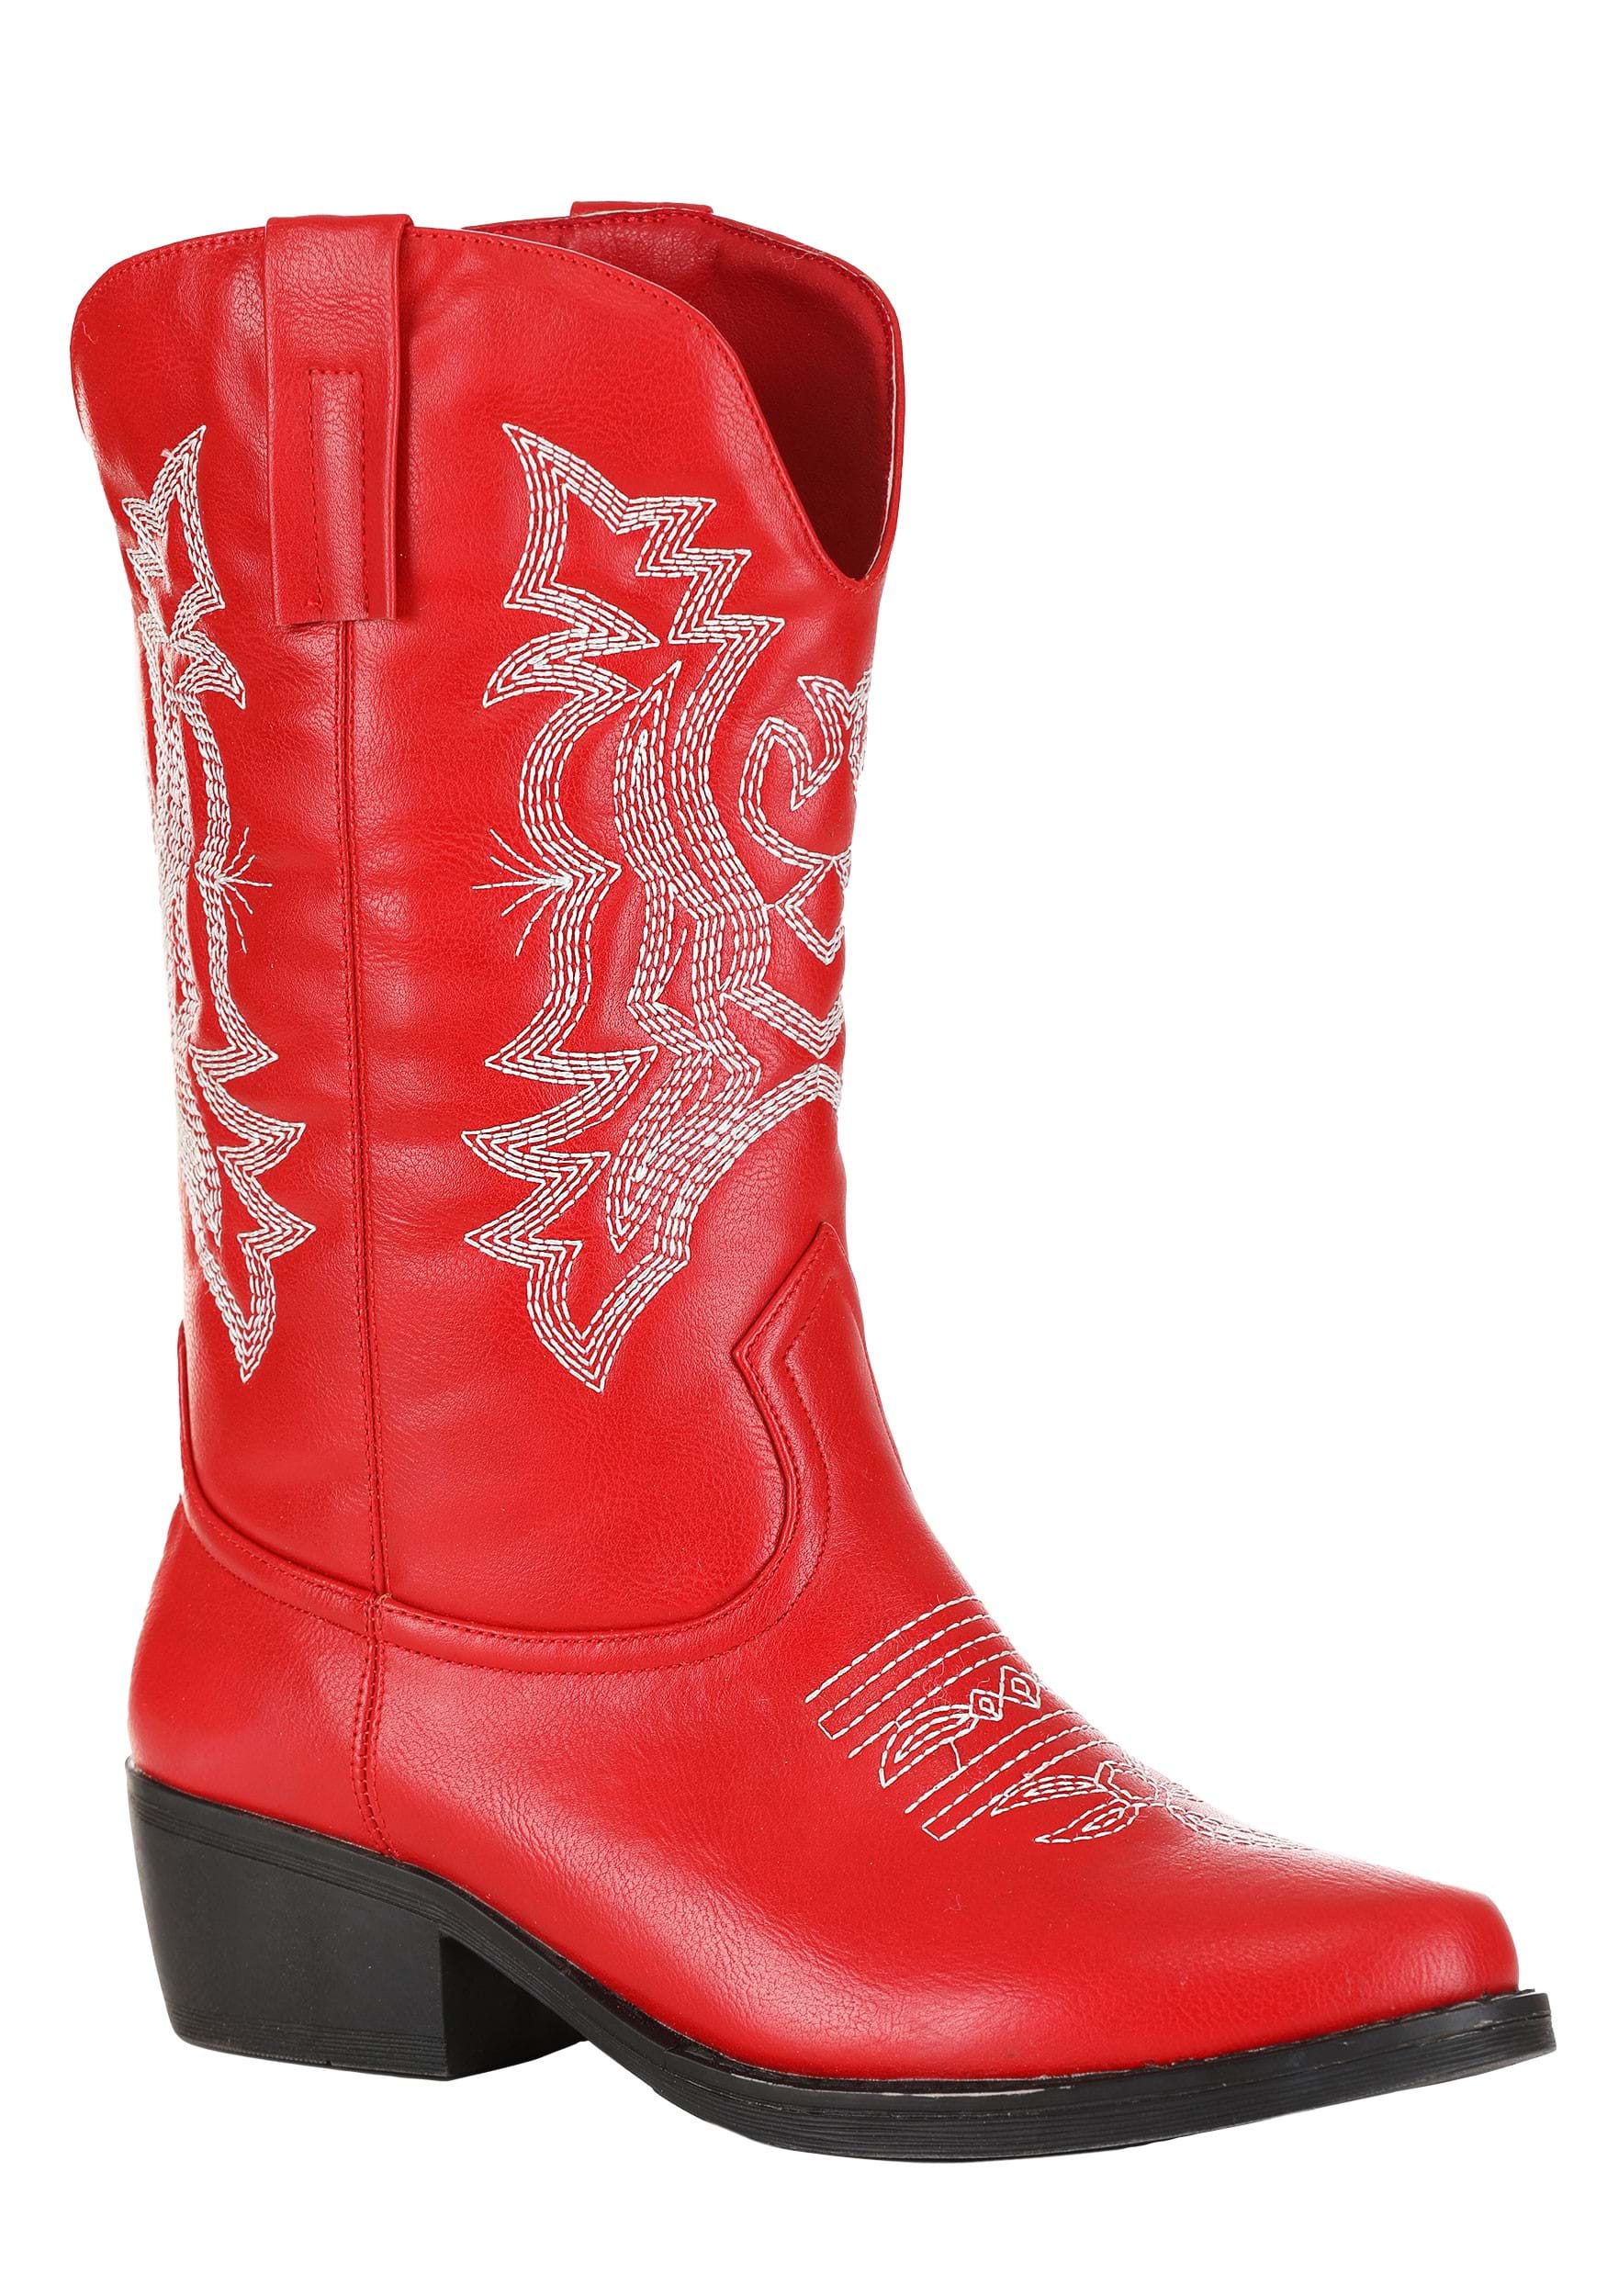 https://images.halloweencostumes.eu/products/91964/1-1/womens-classic-red-cowgirl-boots.jpg